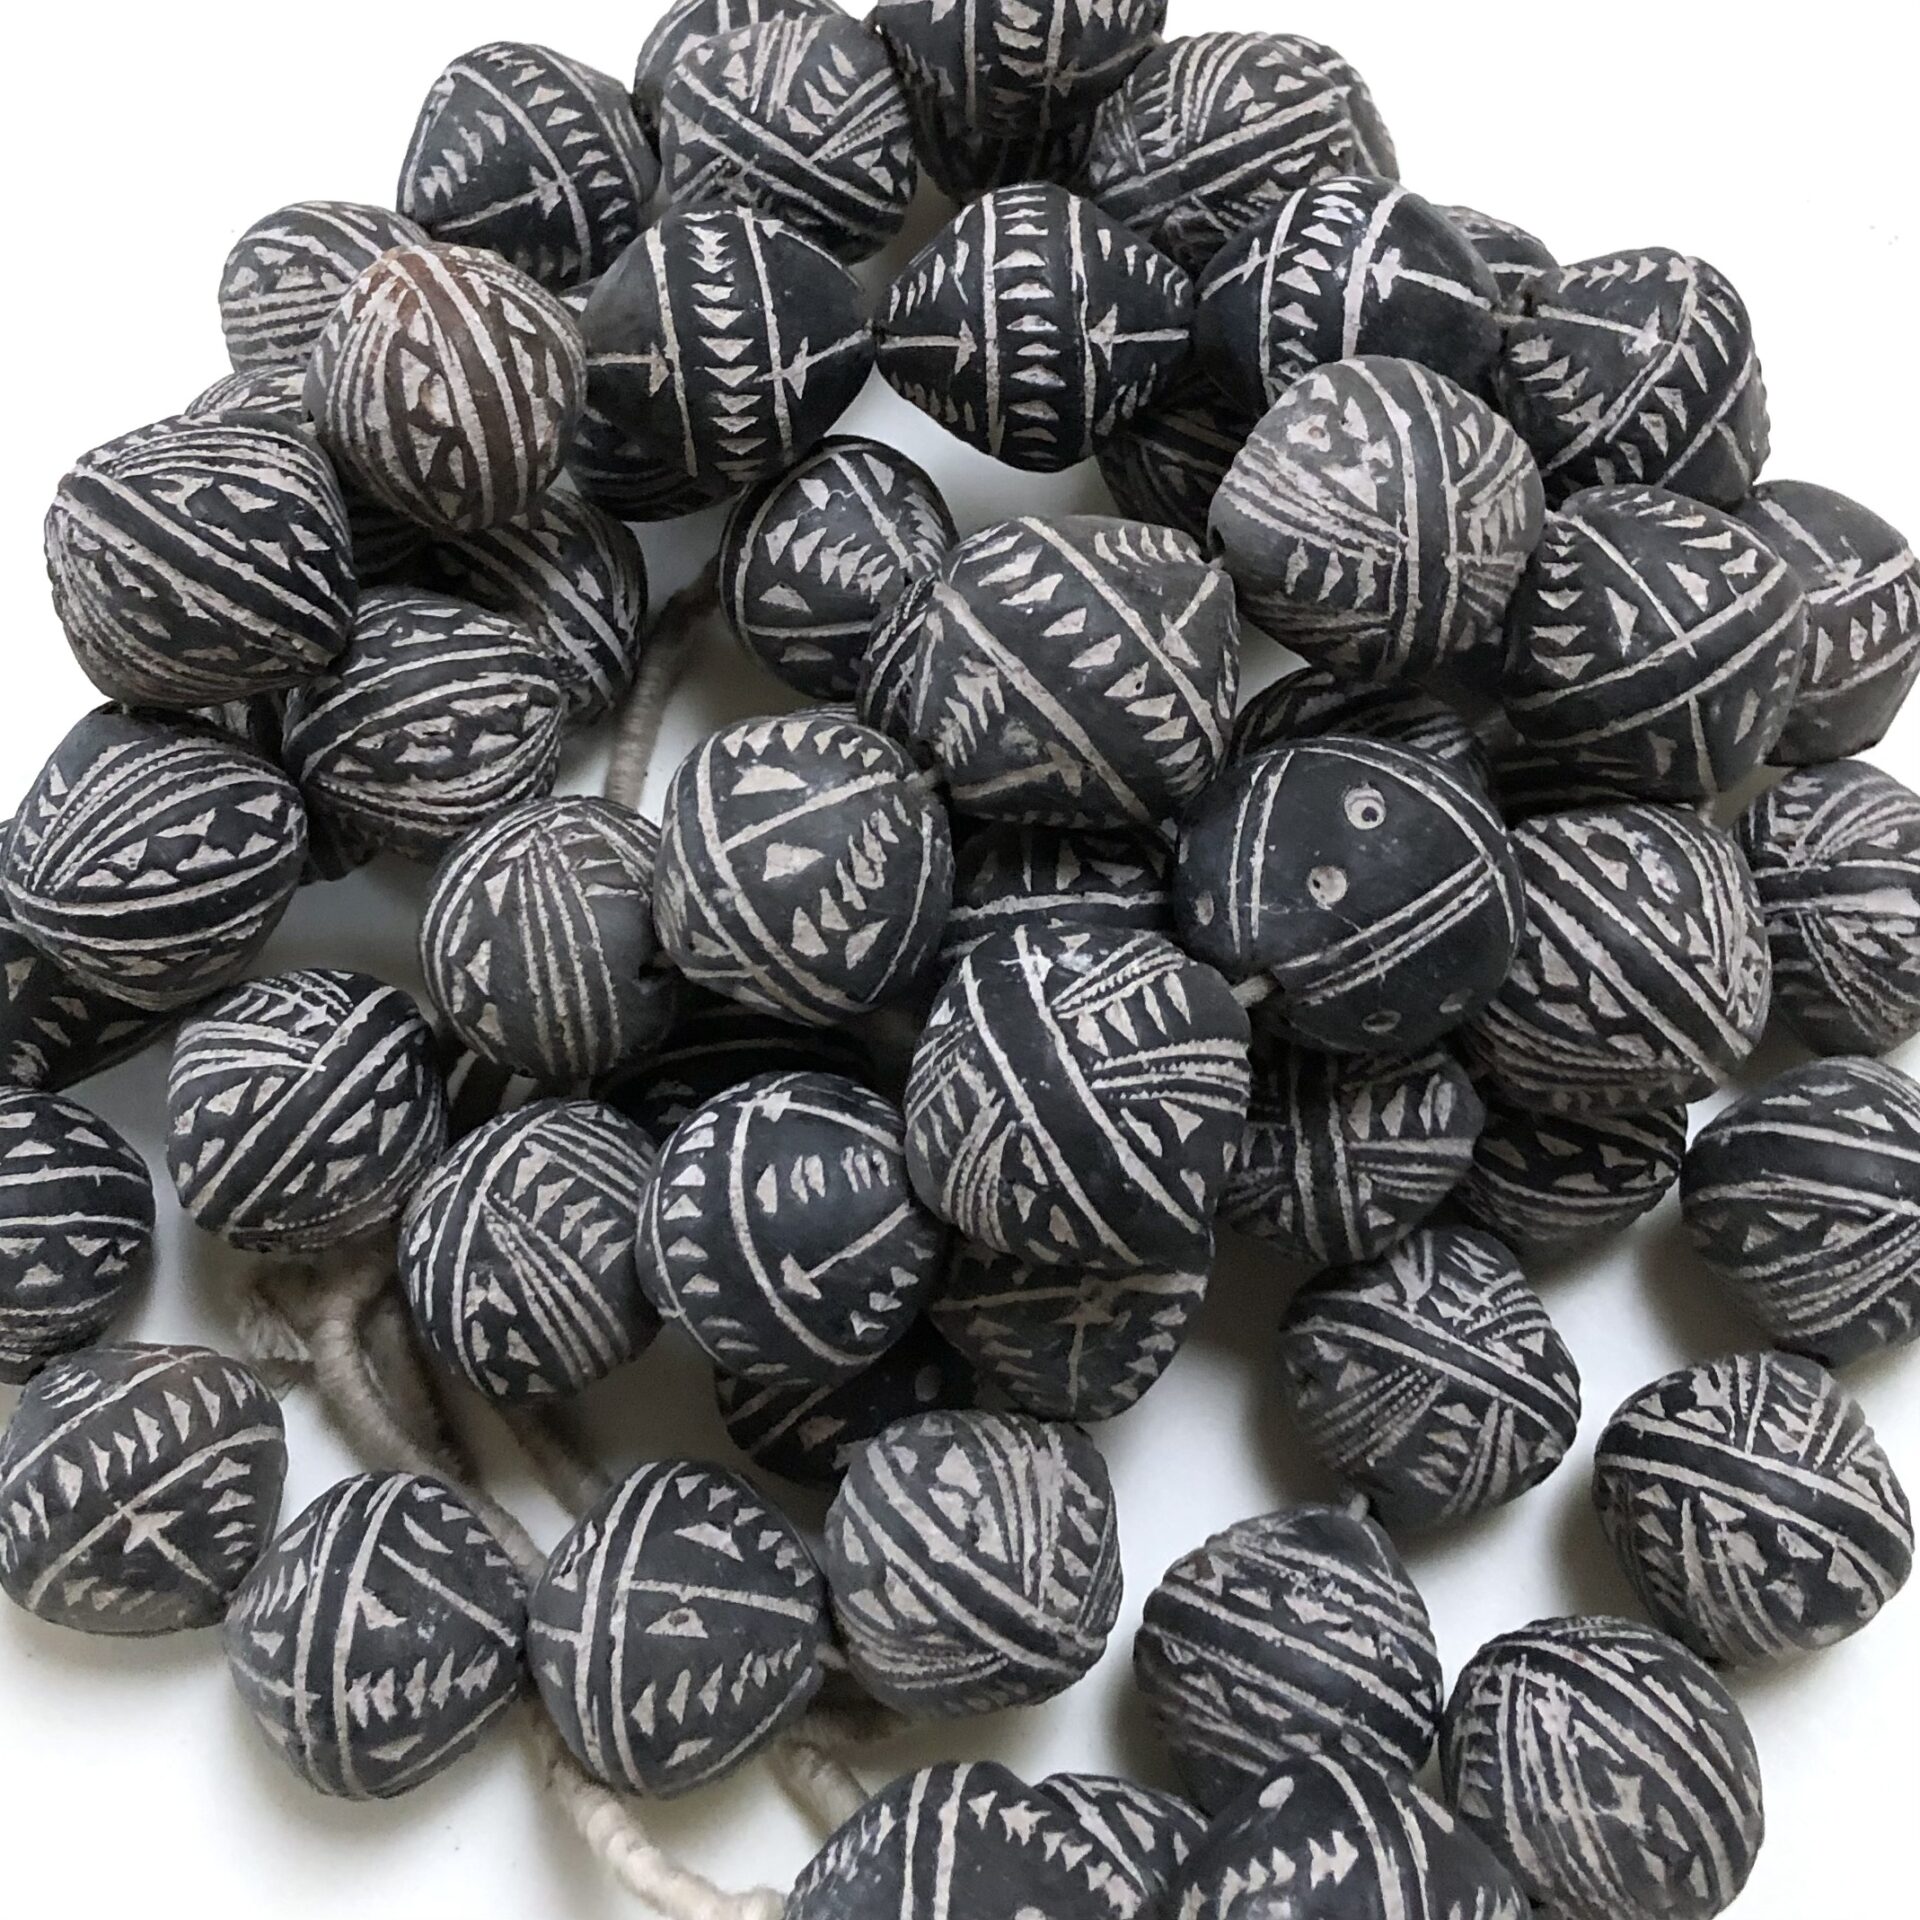 Thebeadchest Tribal Design Bicone Black Mali Clay Beads 20mm African Black and White Large Hole 24 inch Strand Handmade, Adult Unisex